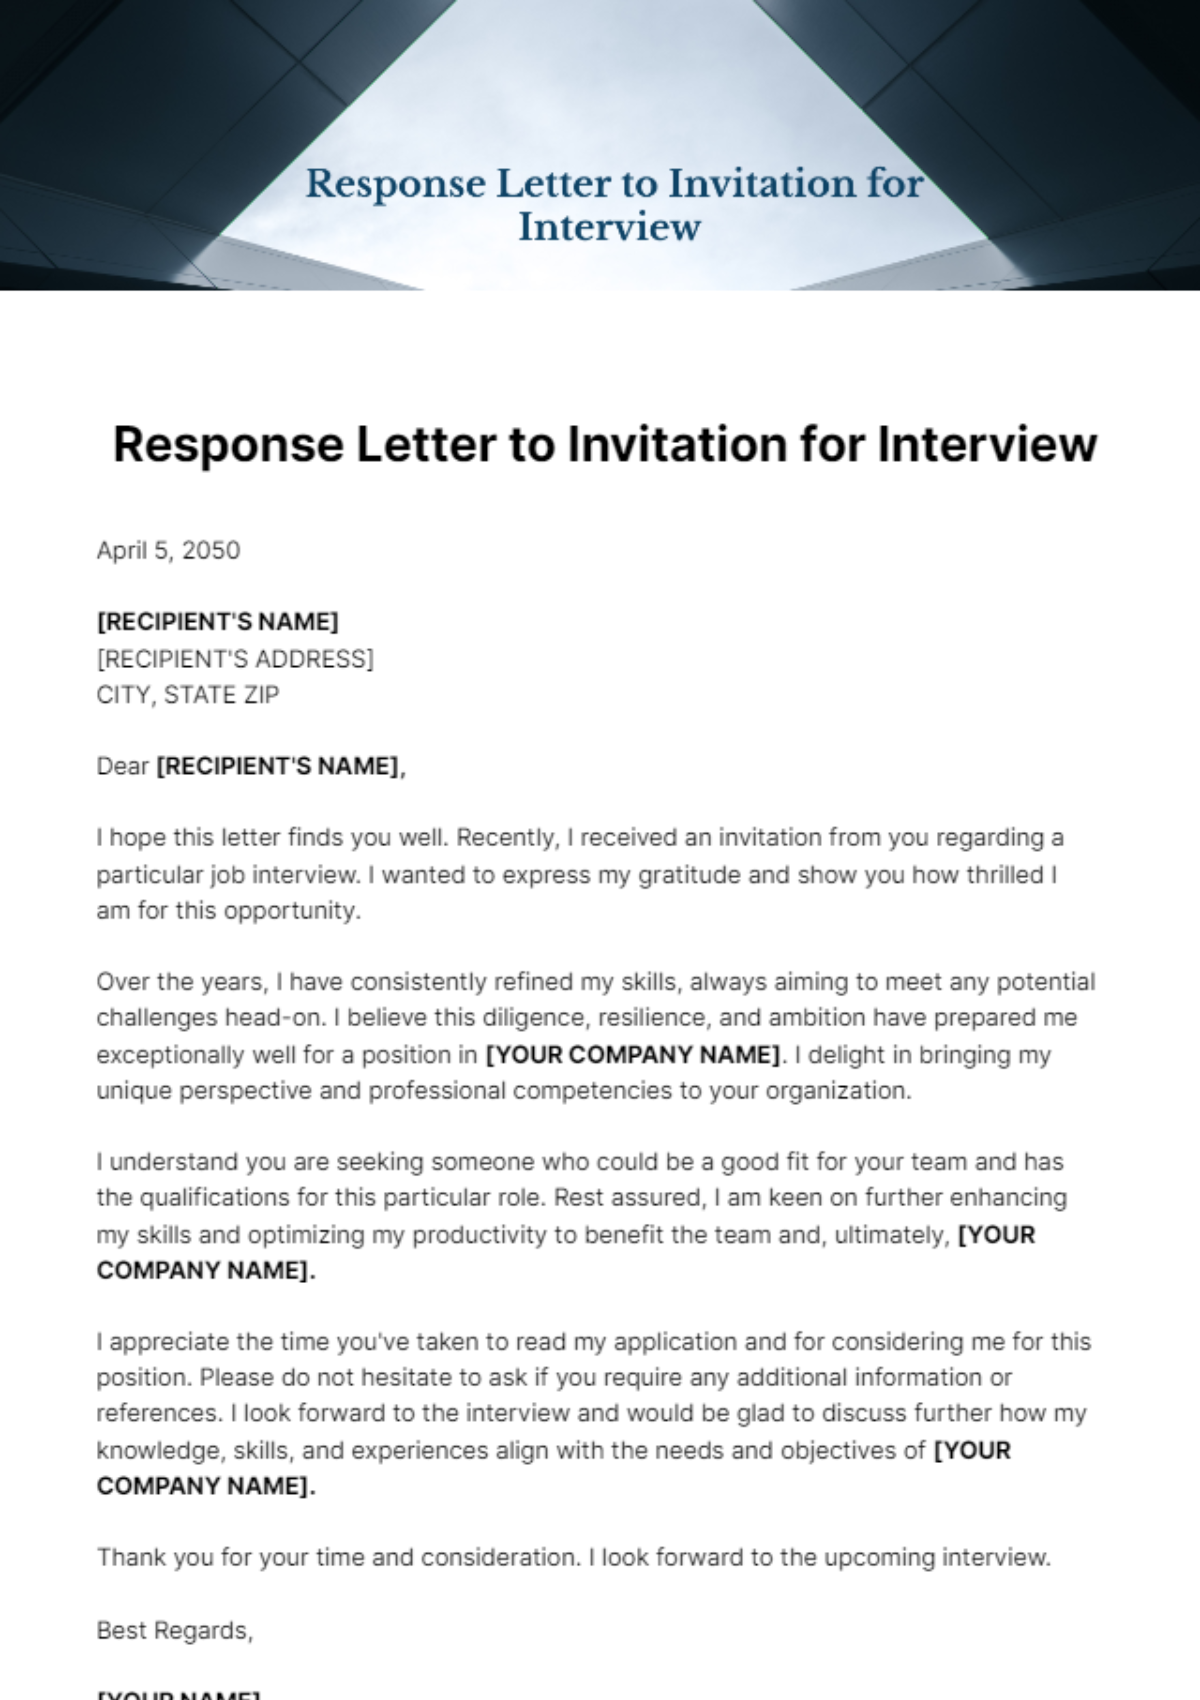 Free Response Letter to Invitation for Interview Template